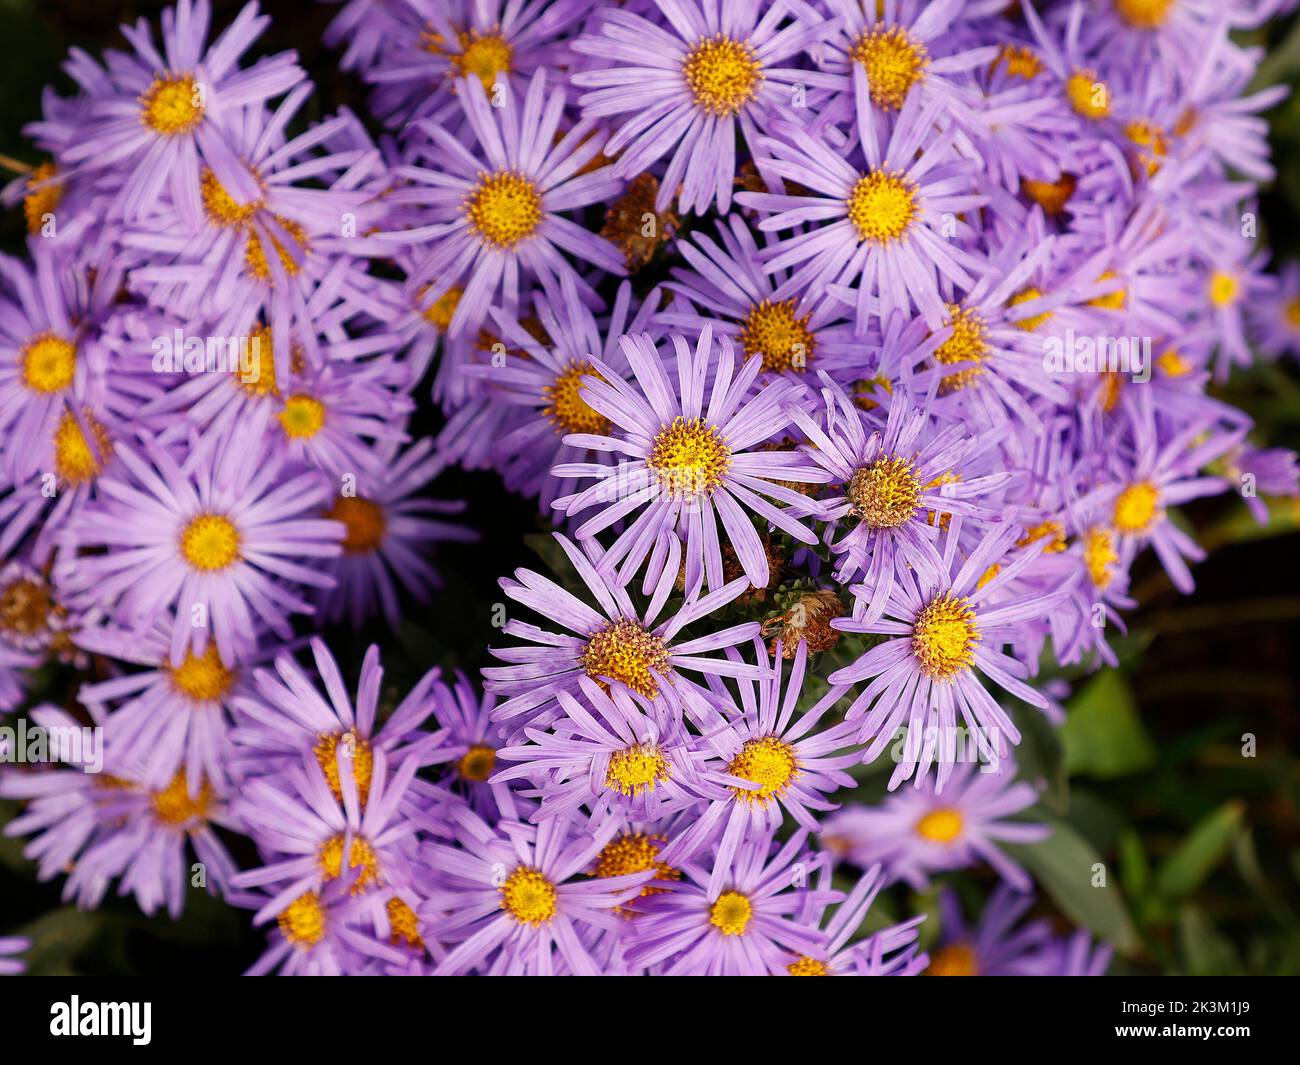 Close up of the late summer and autumn flowering showy flowering garden plant Aster amellus King George seen in the garden in the UK in late summer. Stock Photo